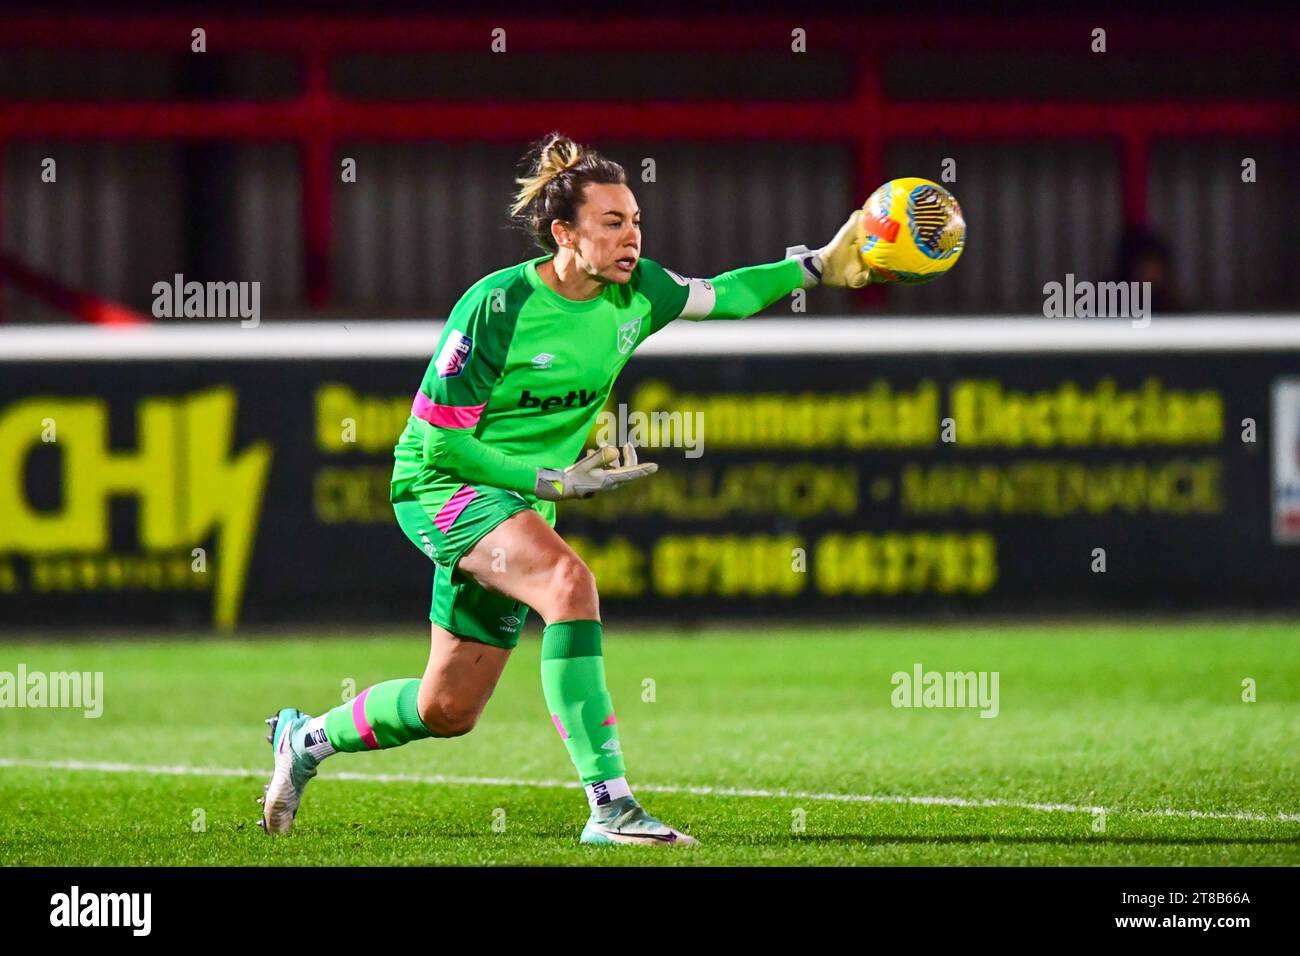 Dagenham on Sunday 19th November 2023. Goalkeeper Mackenzie Arnold (1 West Ham) throws ball during the Barclays FA Women's Super League match between West Ham United and Aston Villa at the Chigwell Construction Stadium, Dagenham on Sunday 19th November 2023. (Photo: Kevin Hodgson | MI News) Credit: MI News & Sport /Alamy Live News Stock Photo